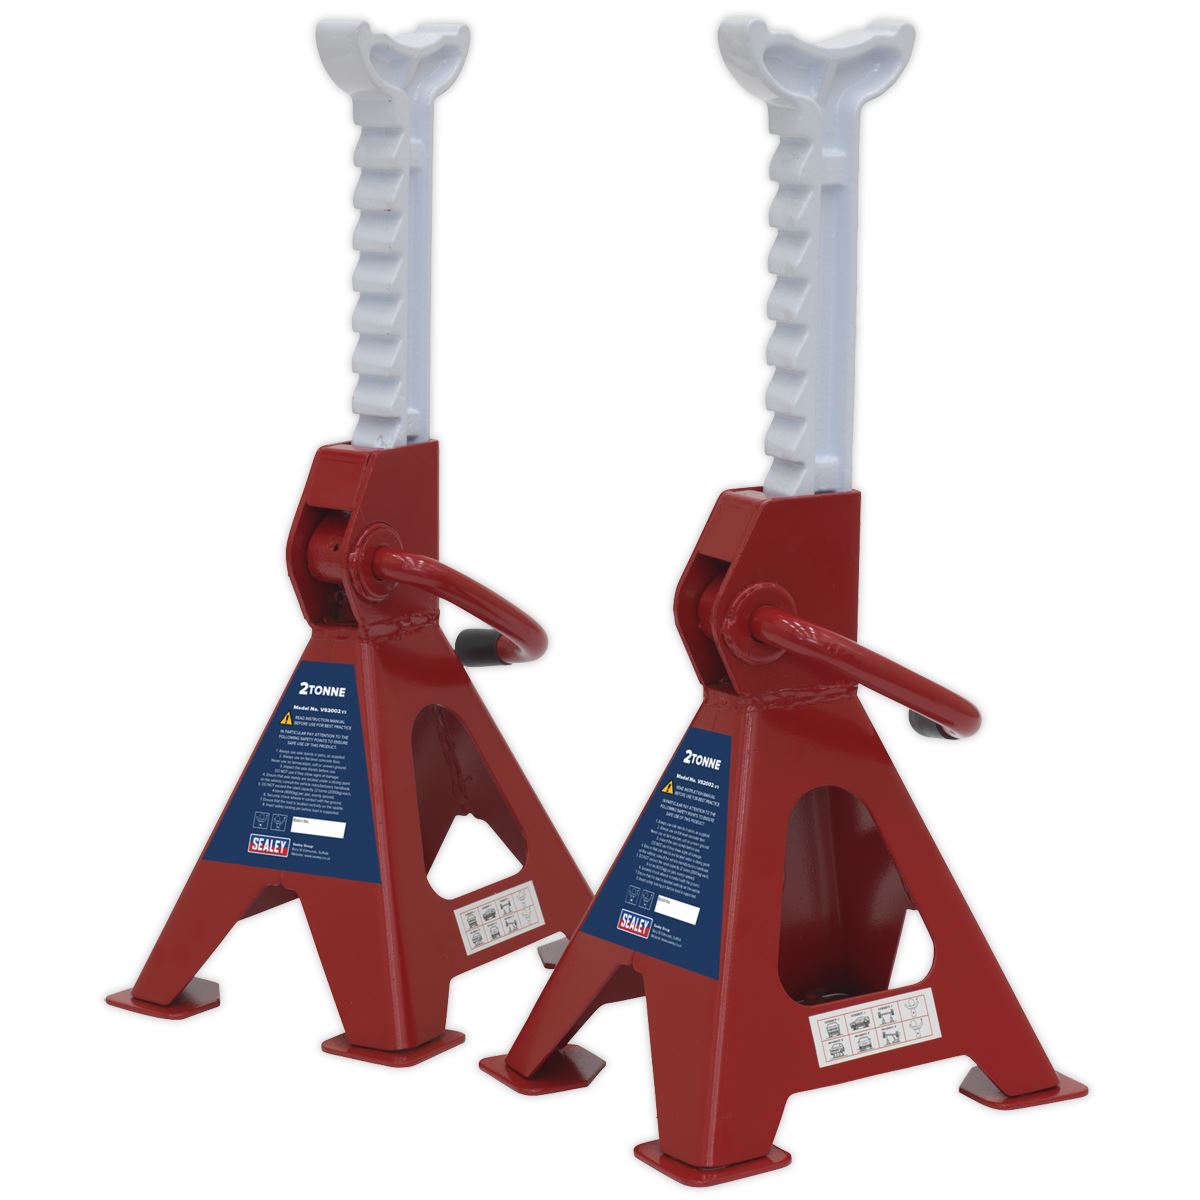 Sealey Ratchet Type Axle Stands (Pair) 2 Tonne Capacity per Stand